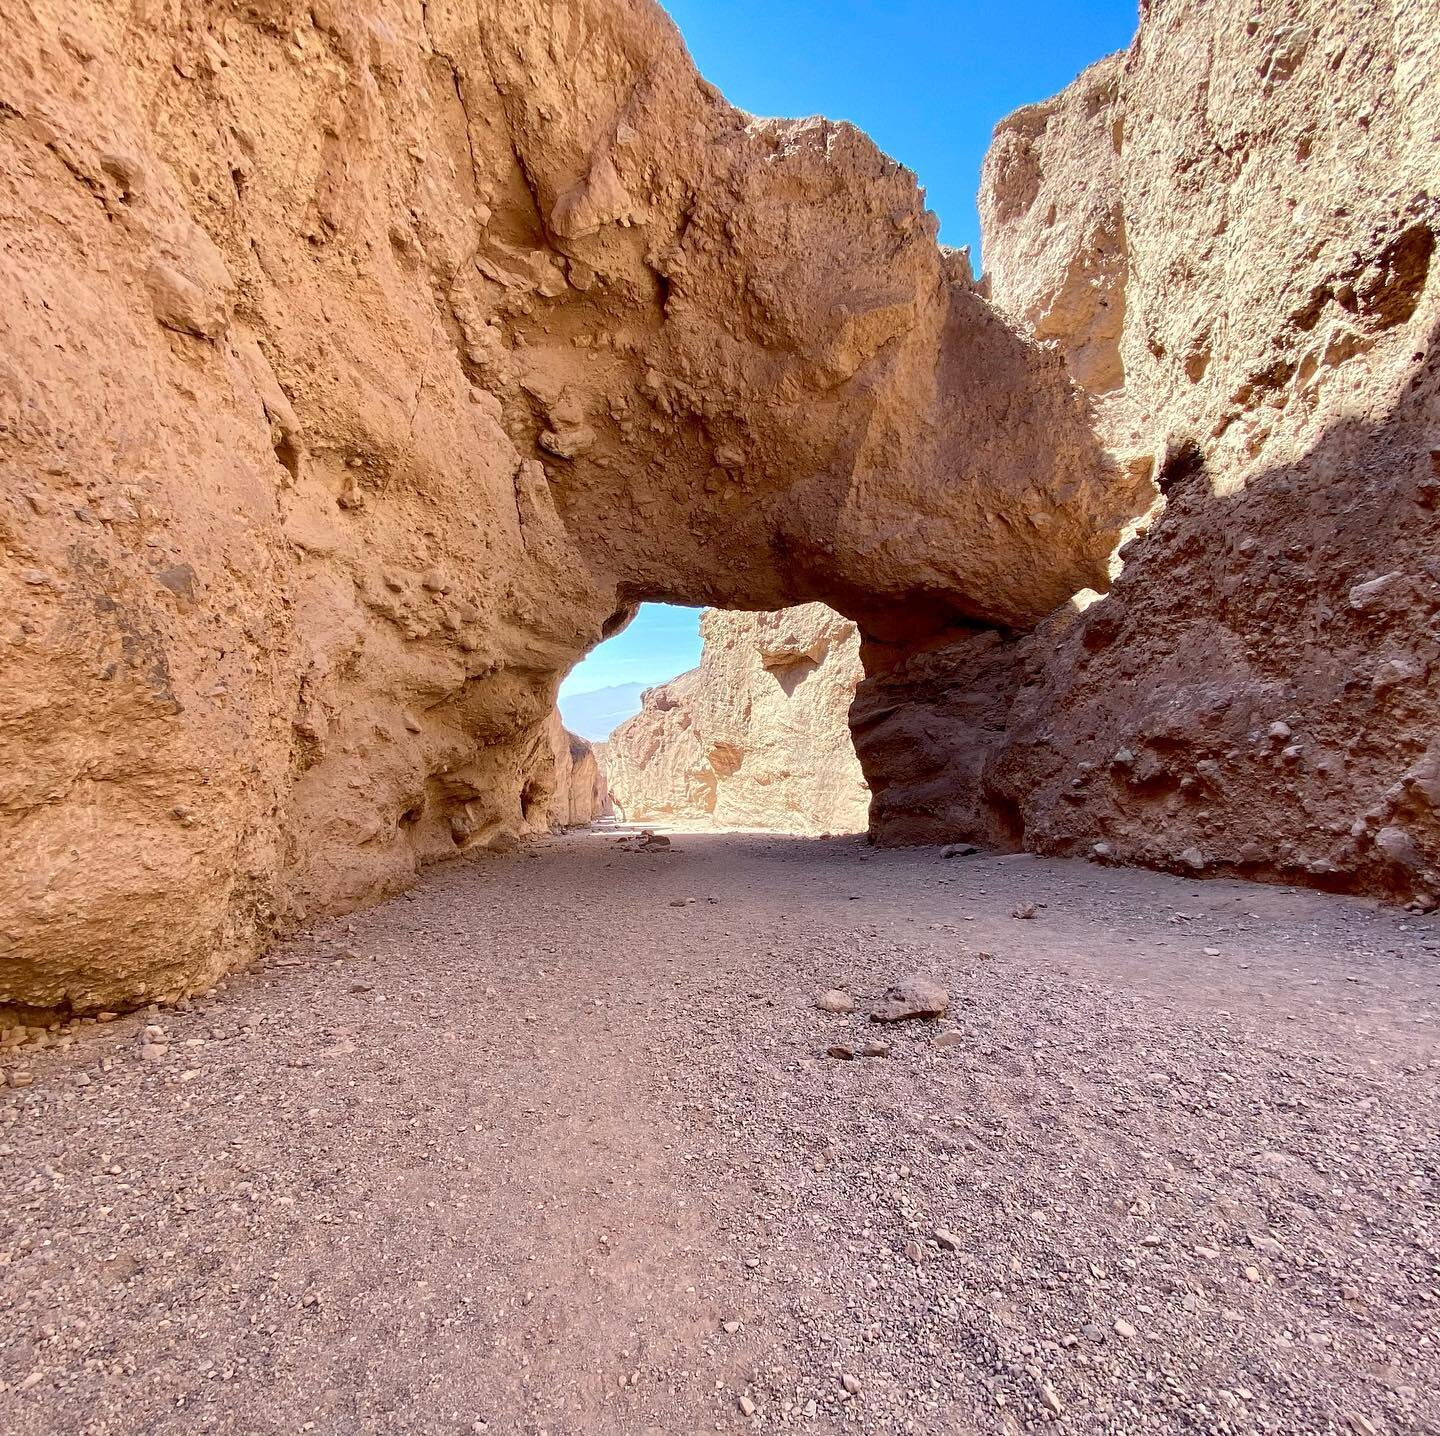 One of the shorter hikes you can do in Death Valley NP takes you through a red walled canyon where you can see a Natural Bridge. The colors are incredible here!

#deathvalleynationalpark #naturalbridgetrail #visitcalifornia